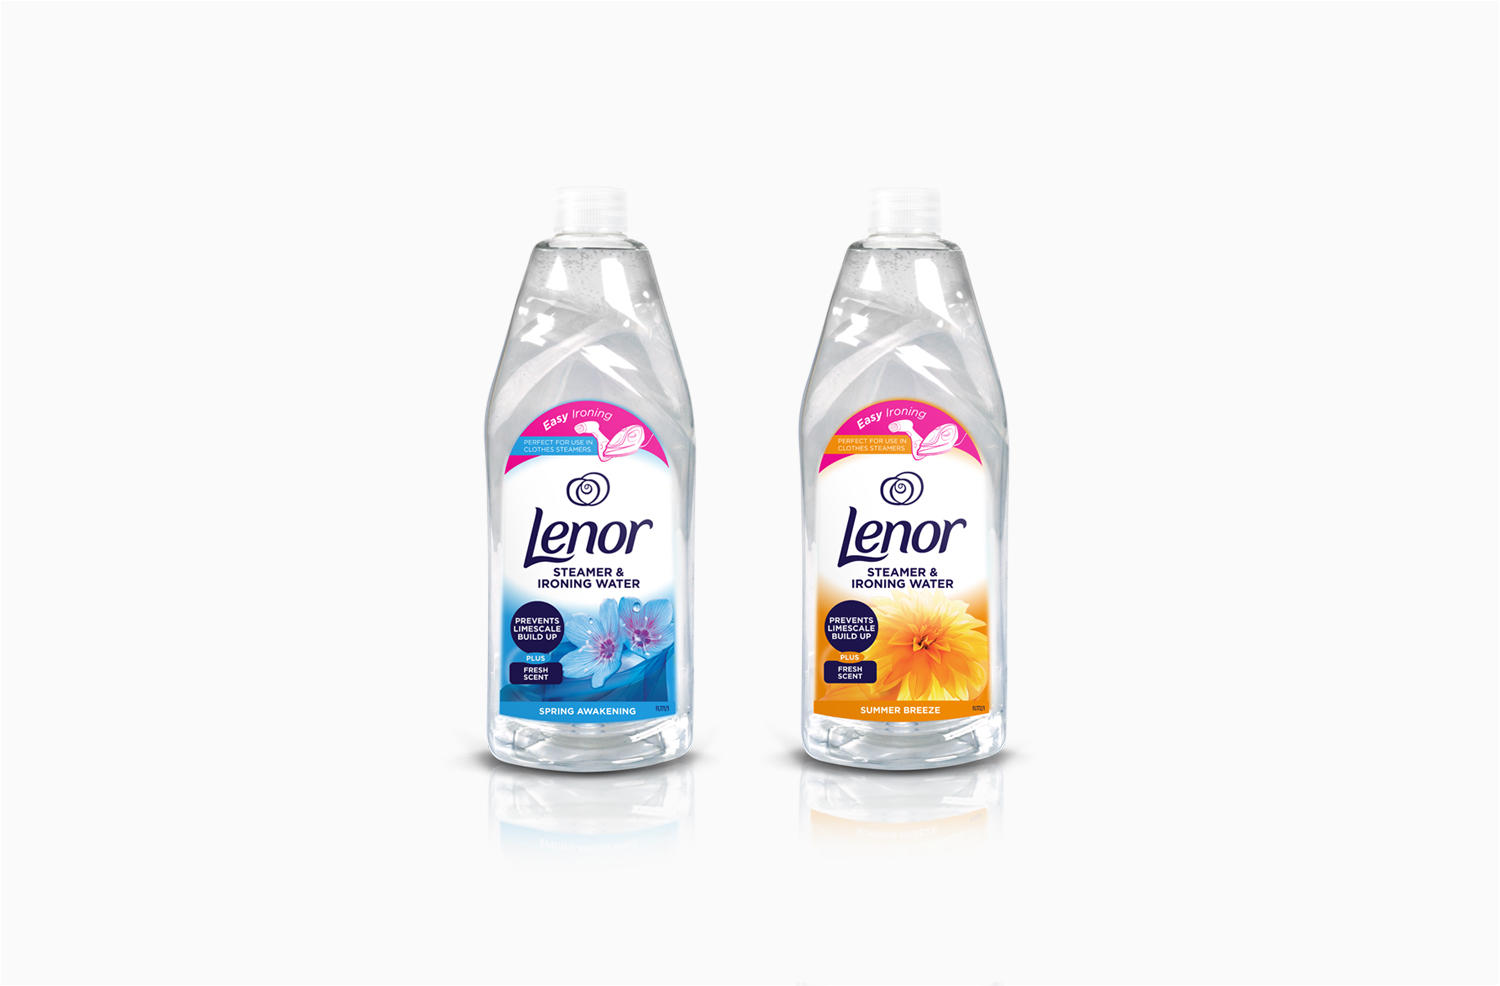 Lenor Steamer & Ironing Water with a scent of Spring Awakening.  Makes ironing easier, while preventing limescale build up.  Leaves your laundry smelling beautifully fresh.